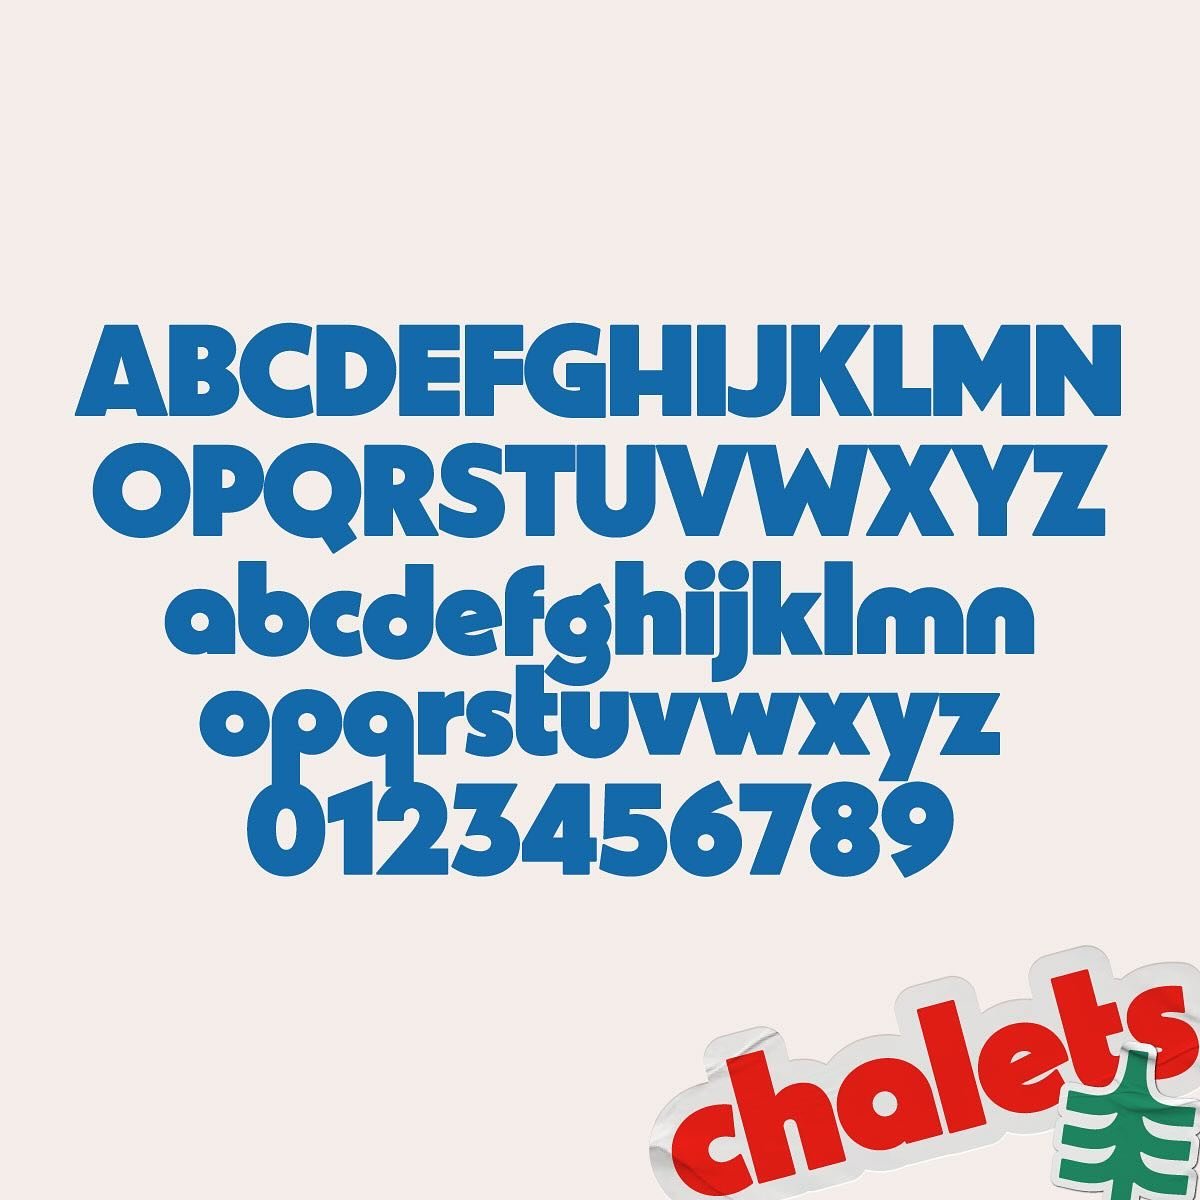 Shout out to my top selling 2023 font, Chalets ❤️ buy her on creative market or if you can&rsquo;t afford it you can download it for free illegally by probably just googling it!